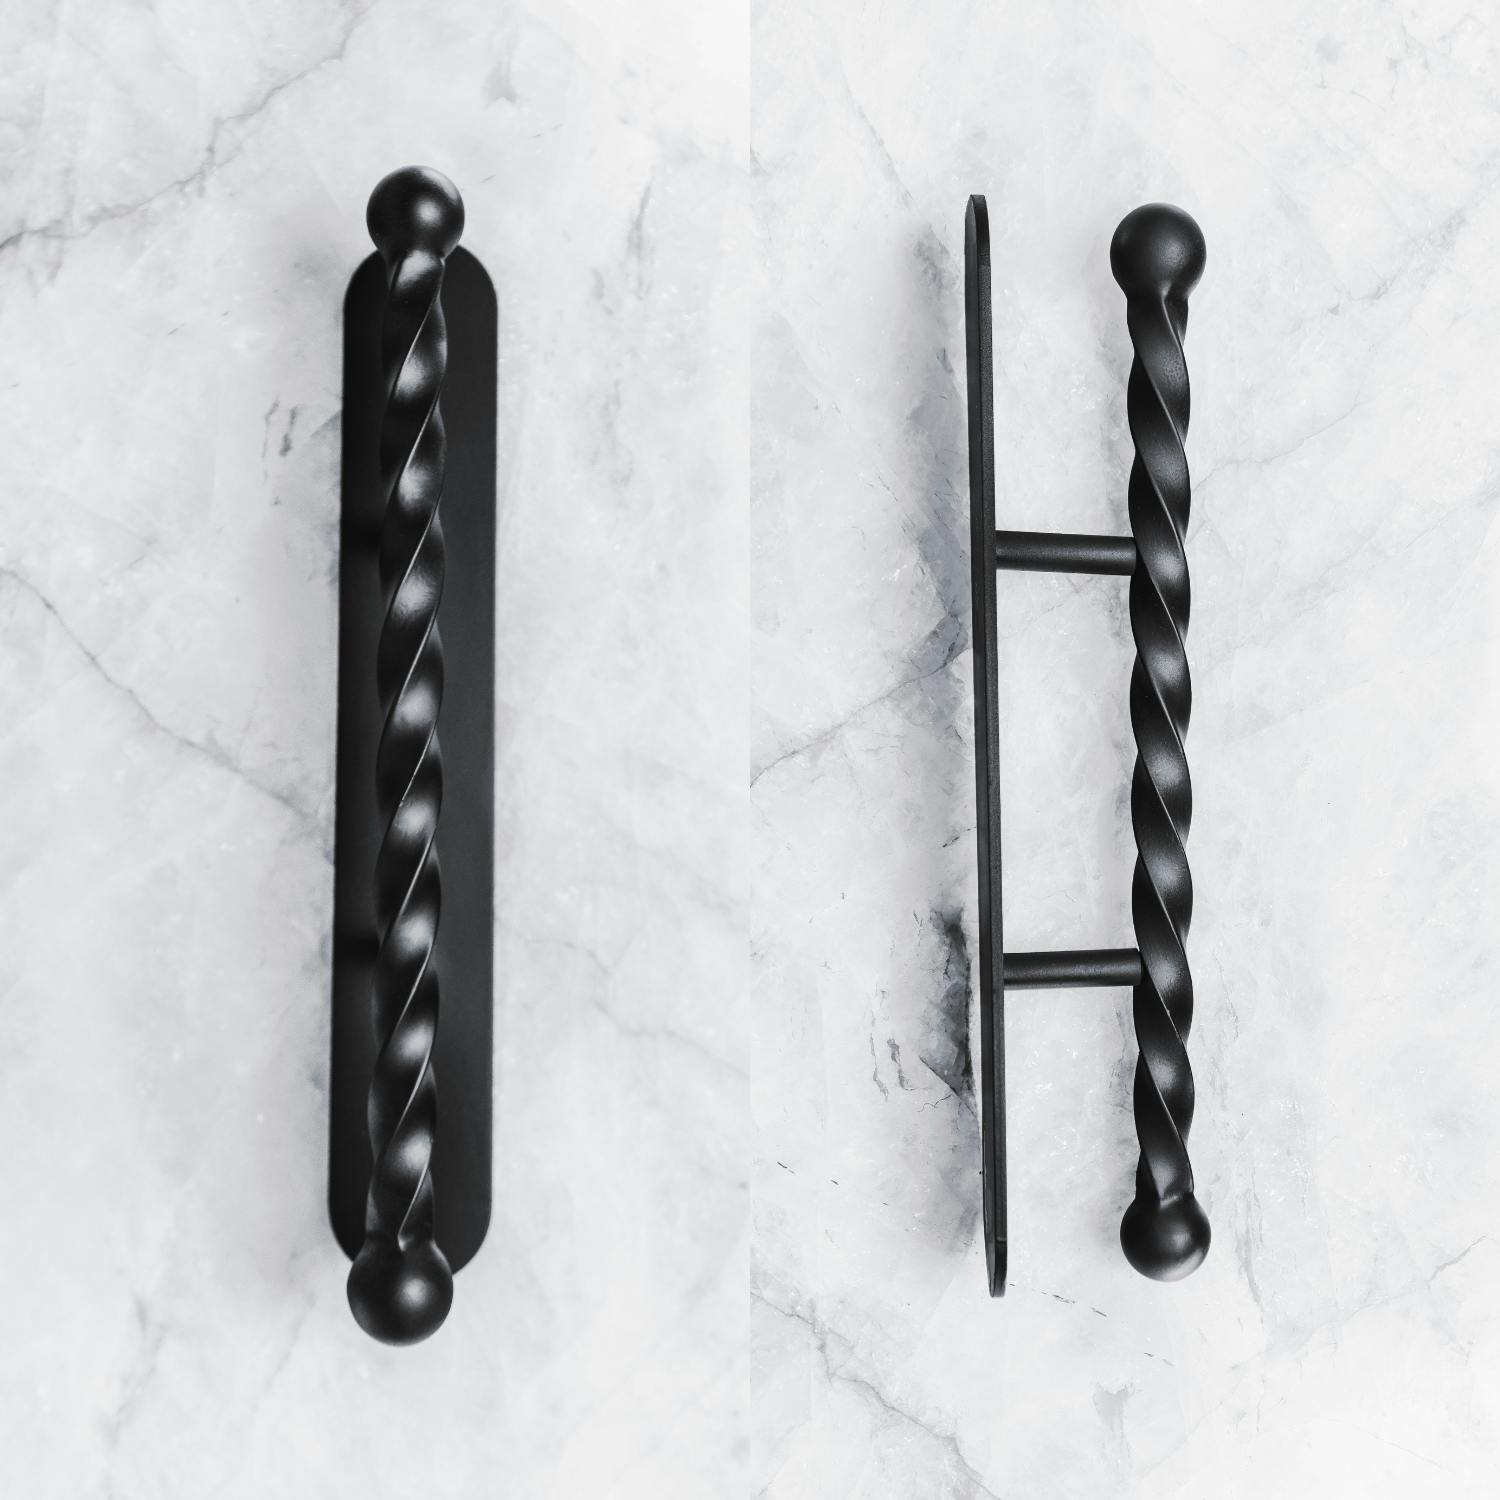 Iron door handle with intricate patterns and artistic details